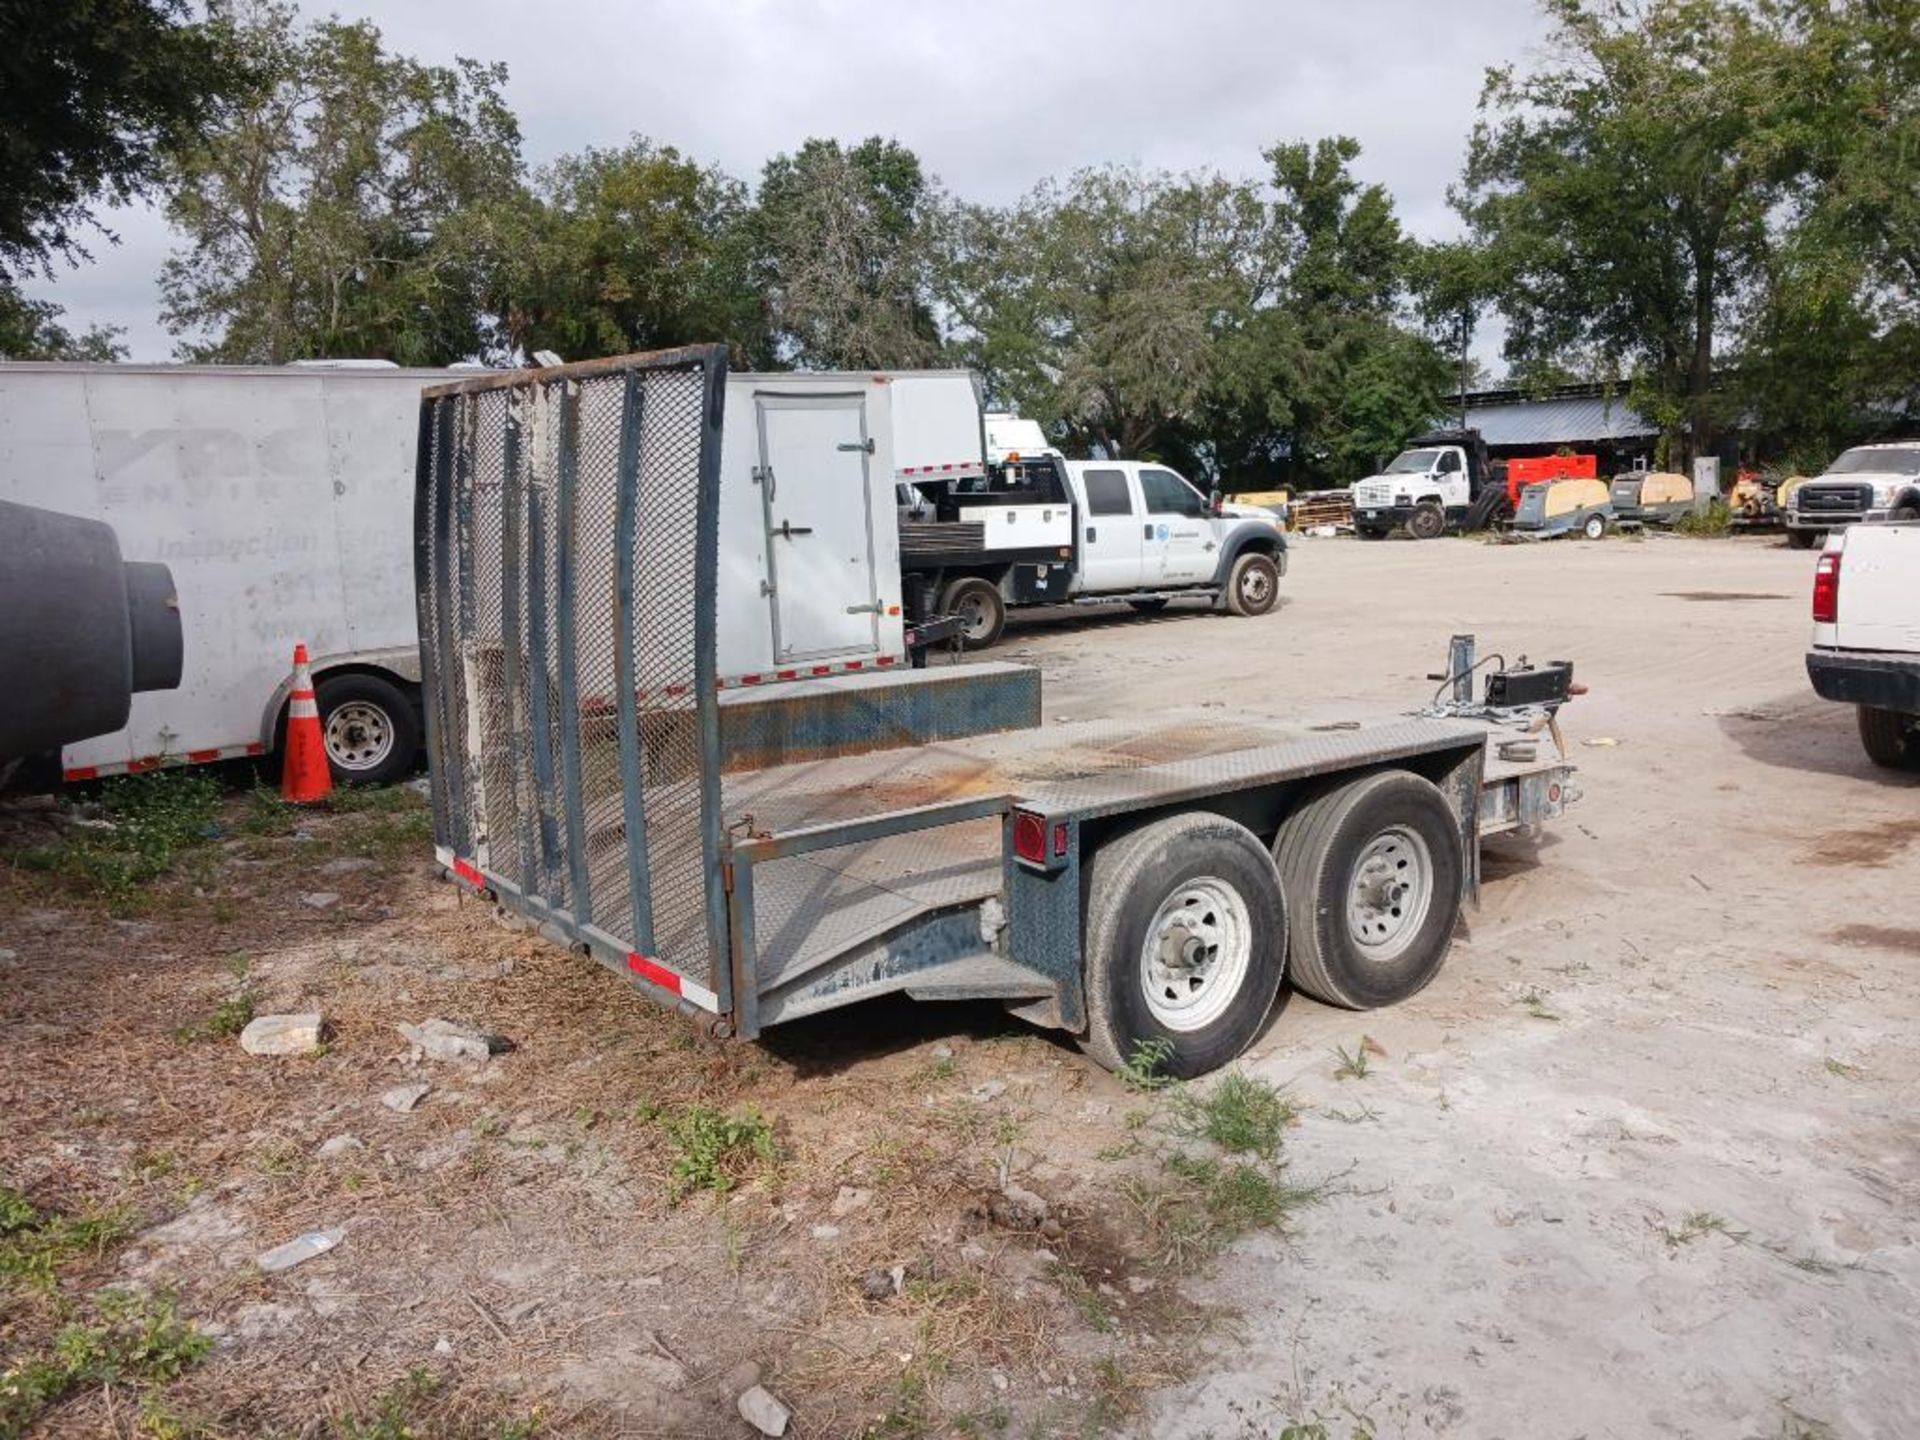 Heavy Duty Tandem Axle Trailer, Pintle Hitch, Shop Built, VIN NOVIN0201114517 (No Title) (Located at - Image 2 of 2